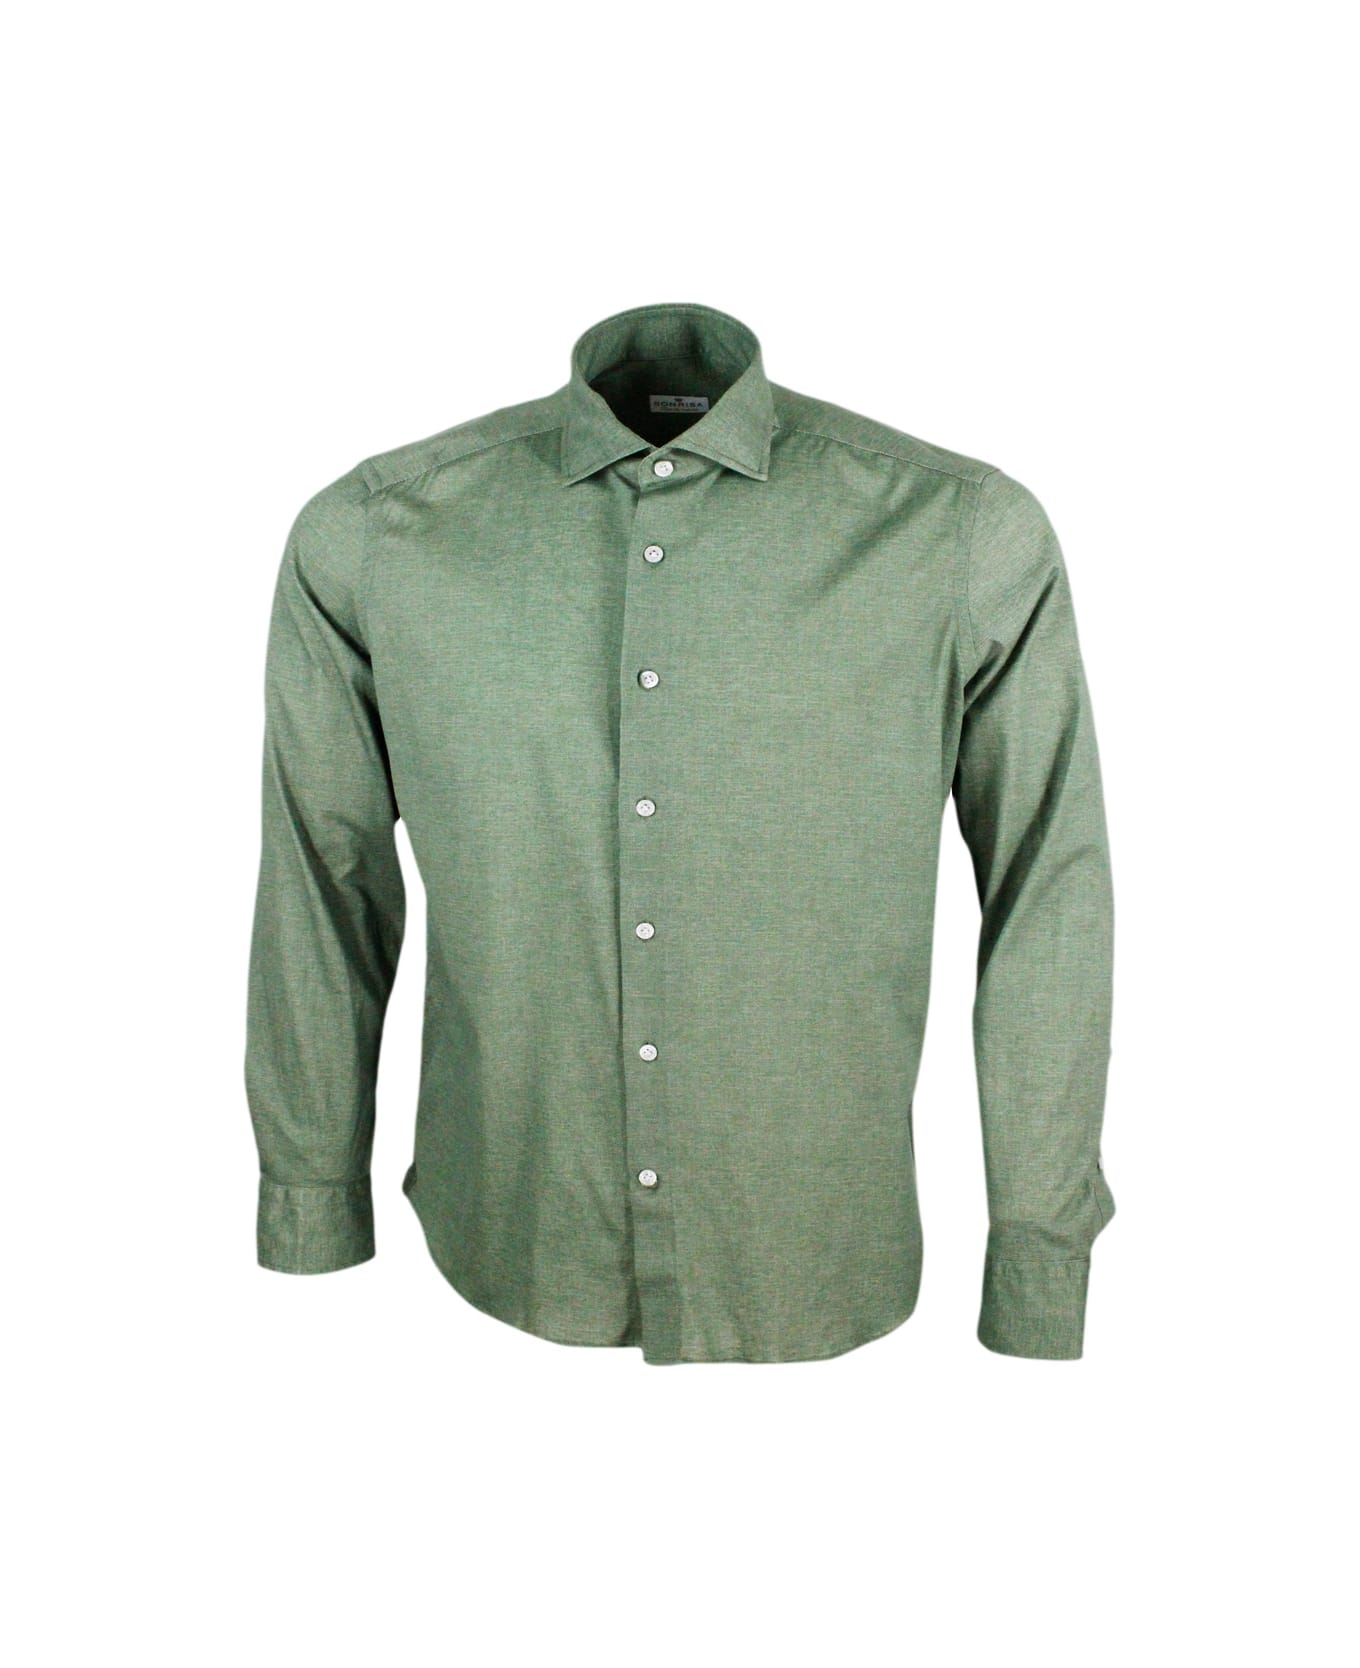 Sonrisa Luxury Shirt In Soft, Precious And Very Fine Stretch Cotton Flower With French Collar In Two-tone Melange Print - Green